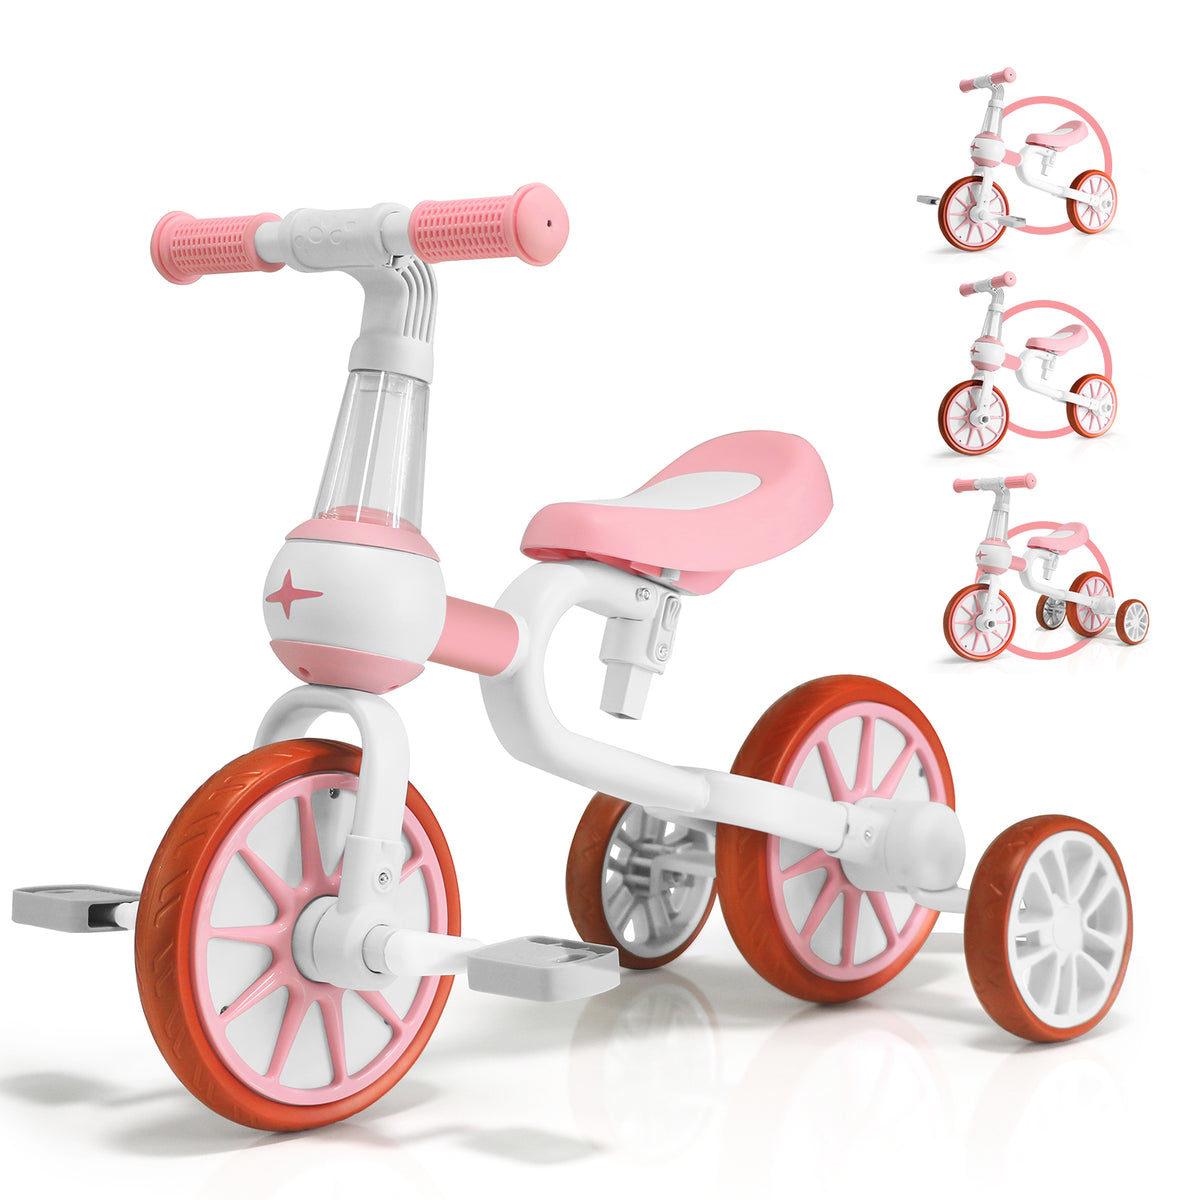 XJD 3 in 1 Toddler Tricycle Bikes, Toy Ride - Pink